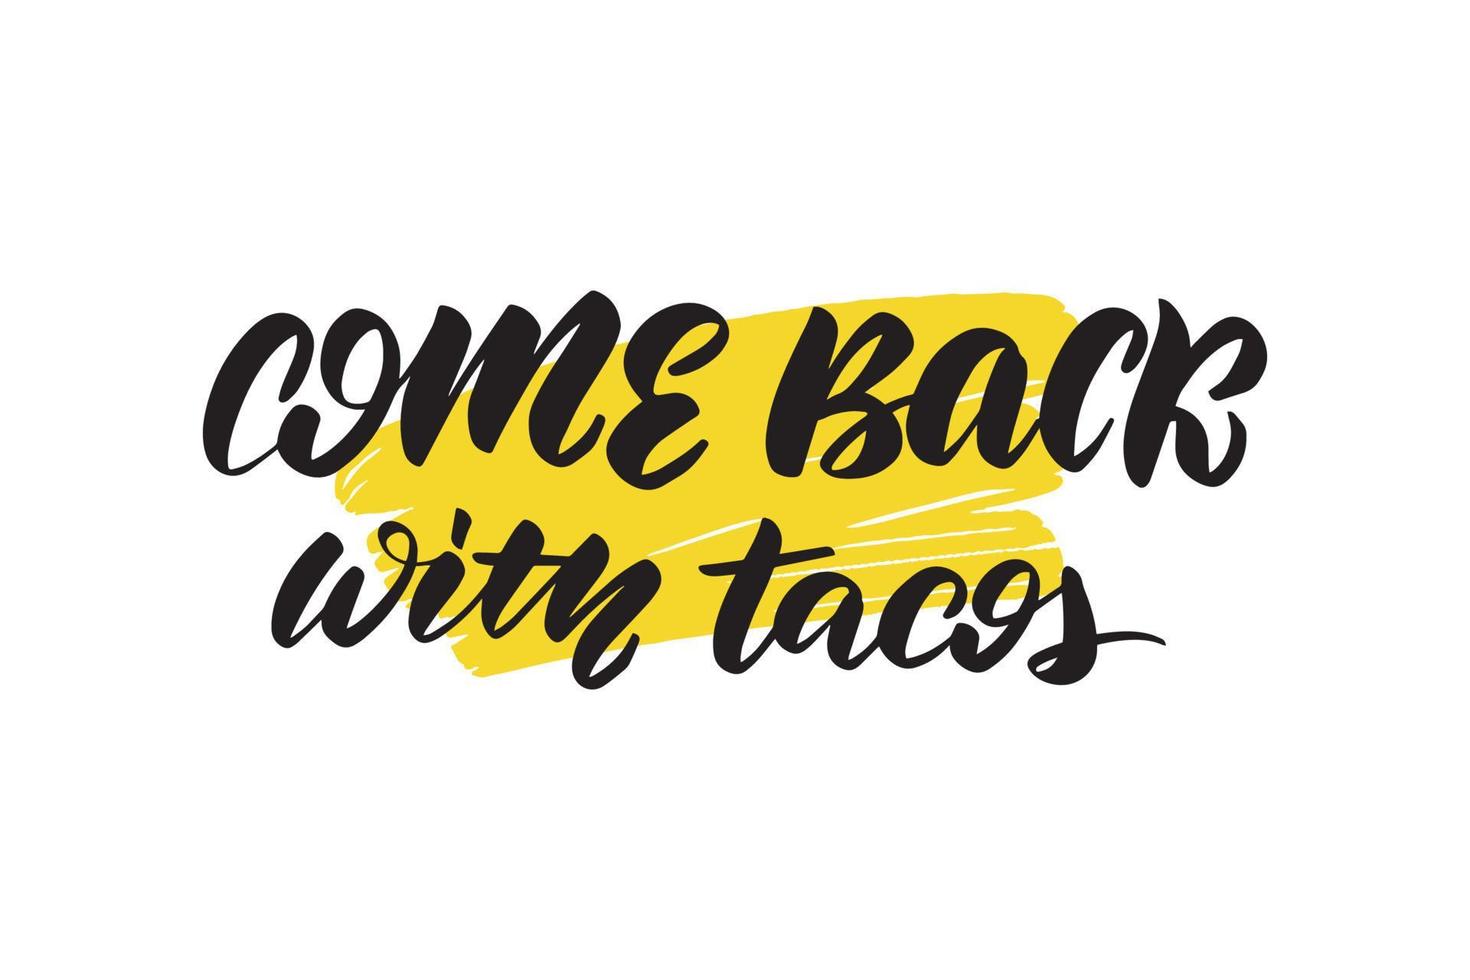 Inspirational handwritten brush lettering come back with tacos. Vector calligraphy stock illustration isolated on white background. Typography for banners, badges, postcard, tshirt, prints, posters.